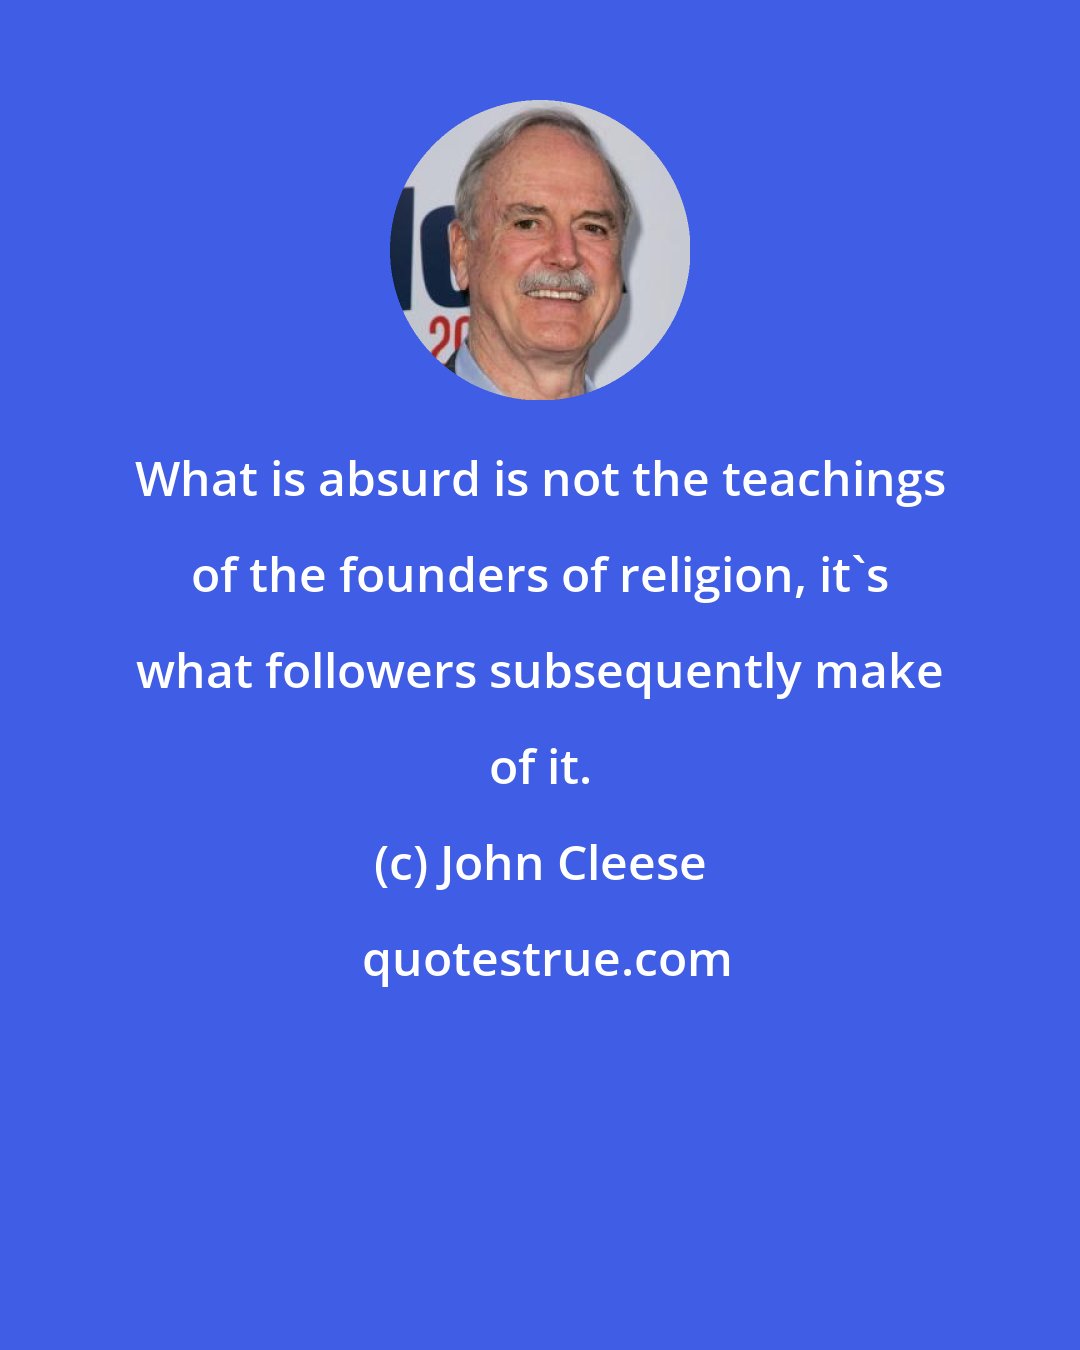 John Cleese: What is absurd is not the teachings of the founders of religion, it's what followers subsequently make of it.